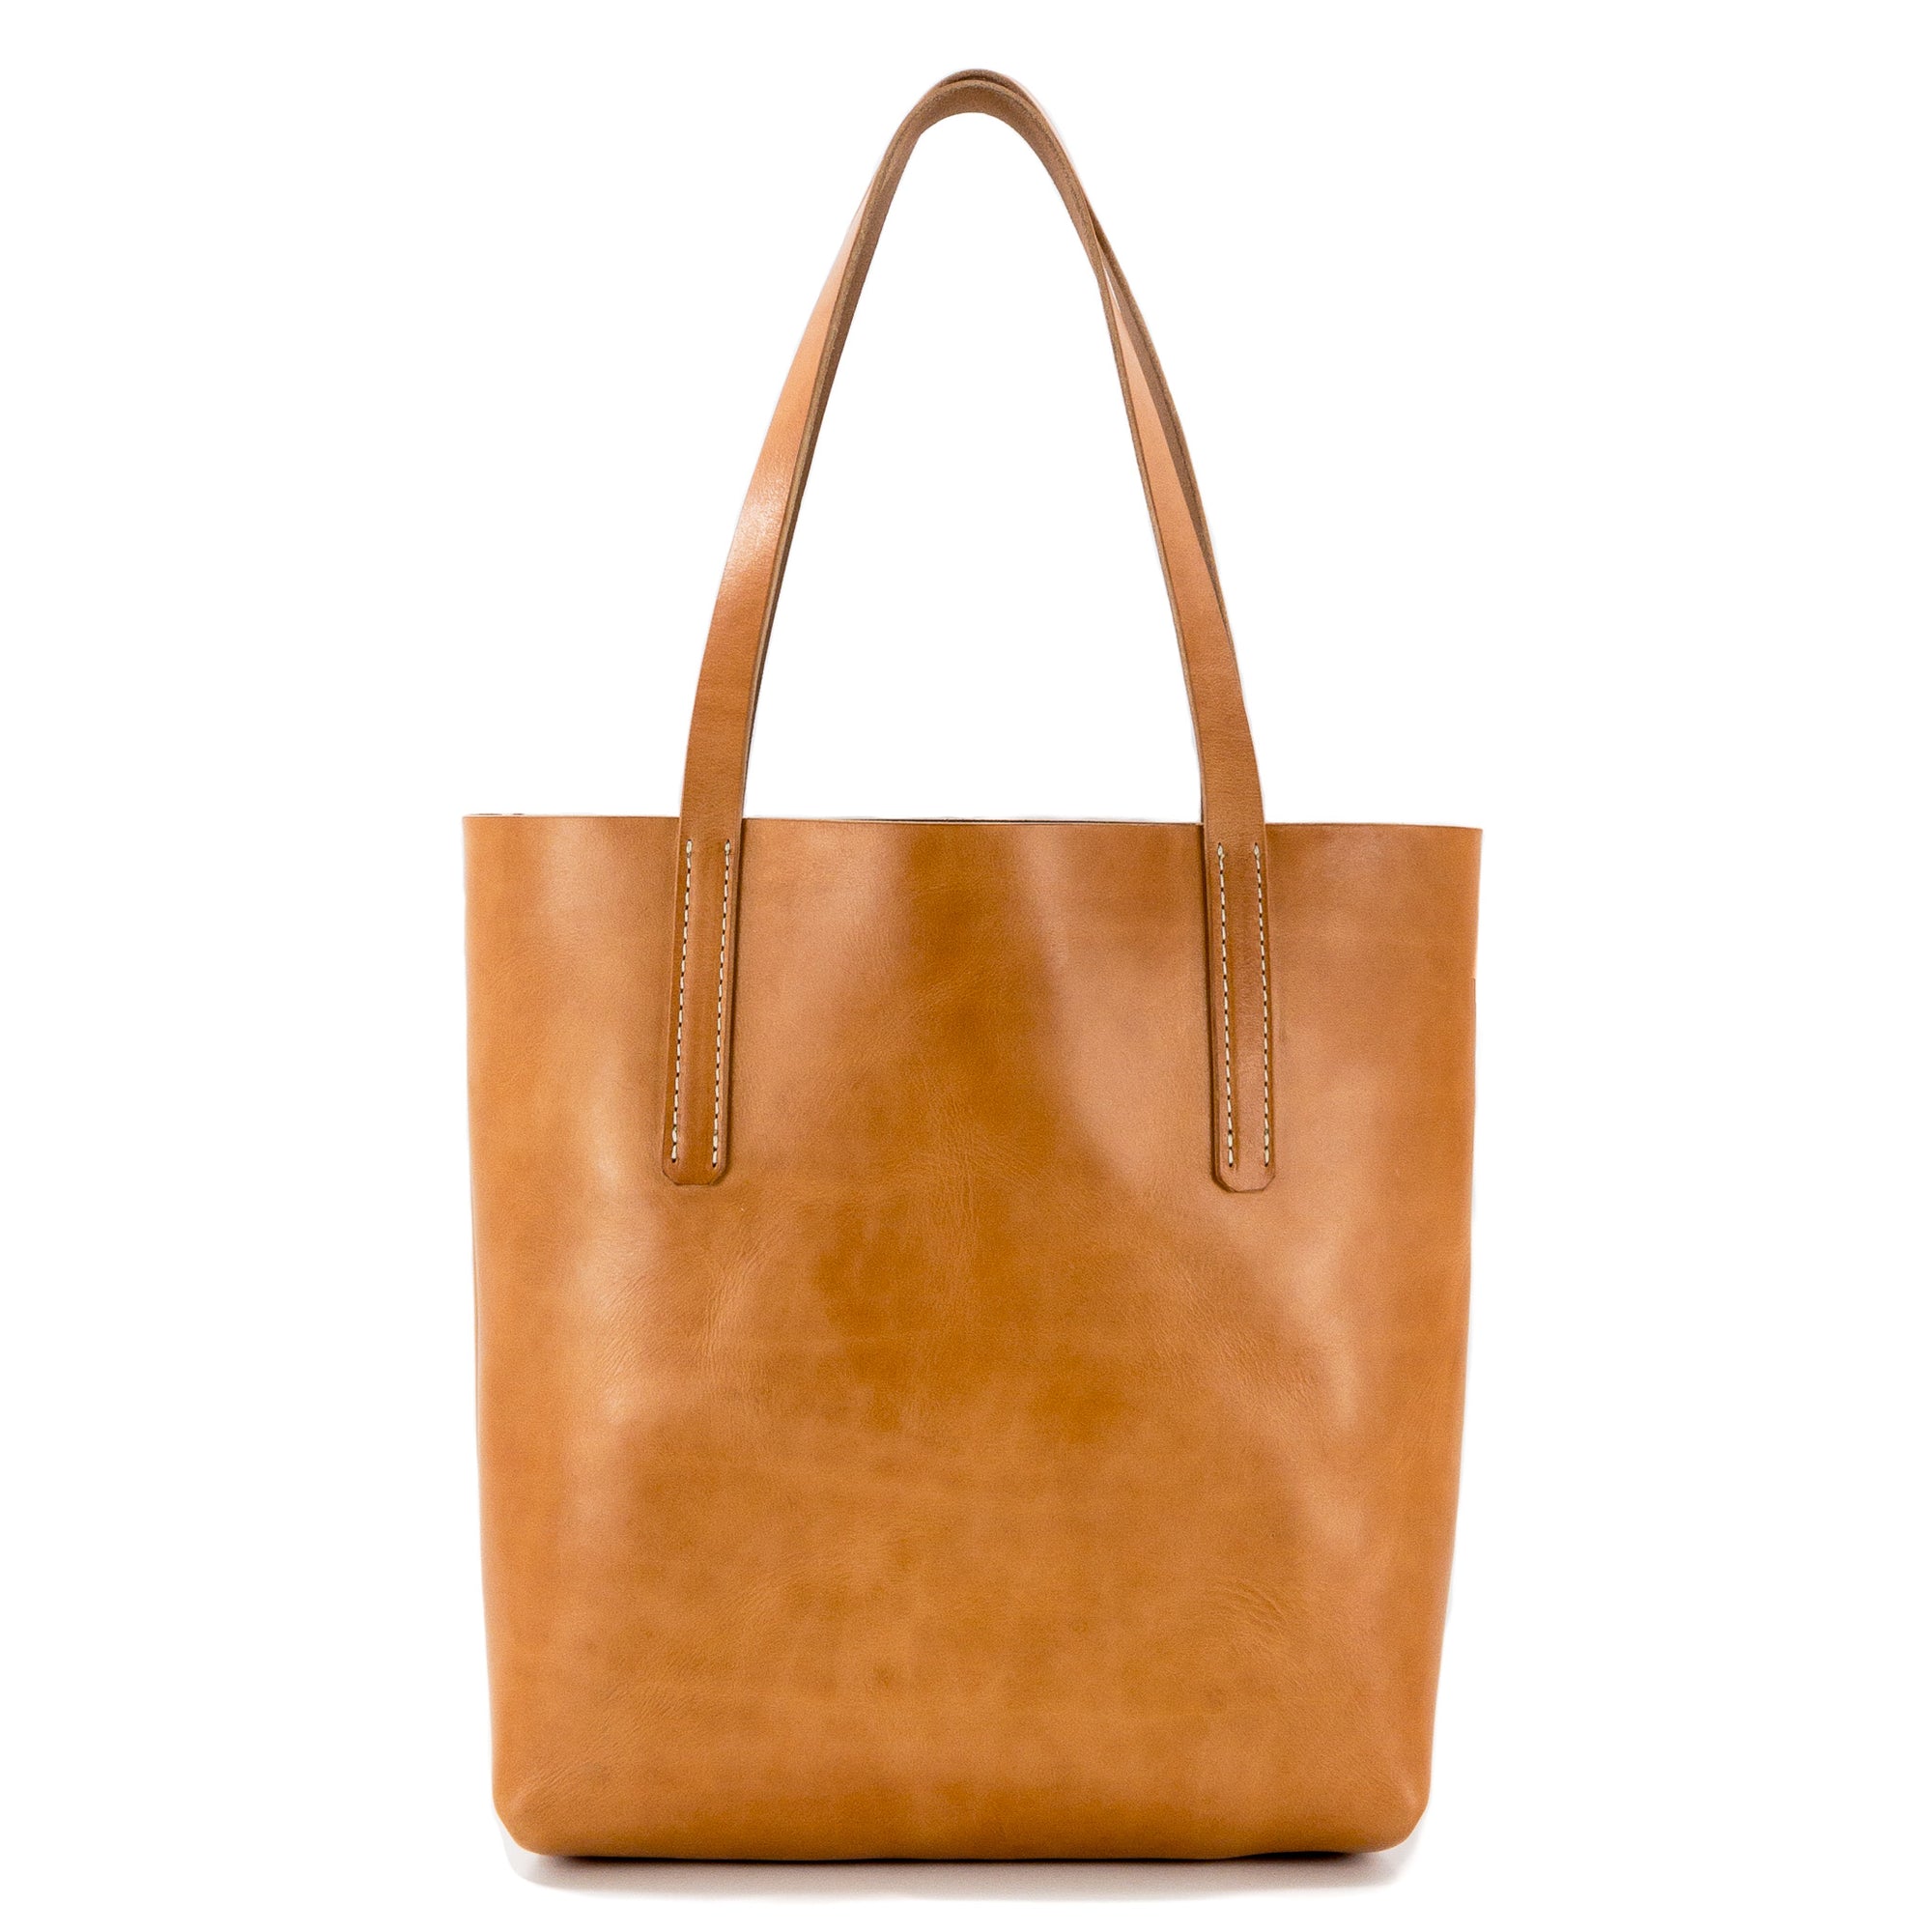 Harness Leather Tote Bag in Natural - Everyday Heirloom Bag - Kingston Barn